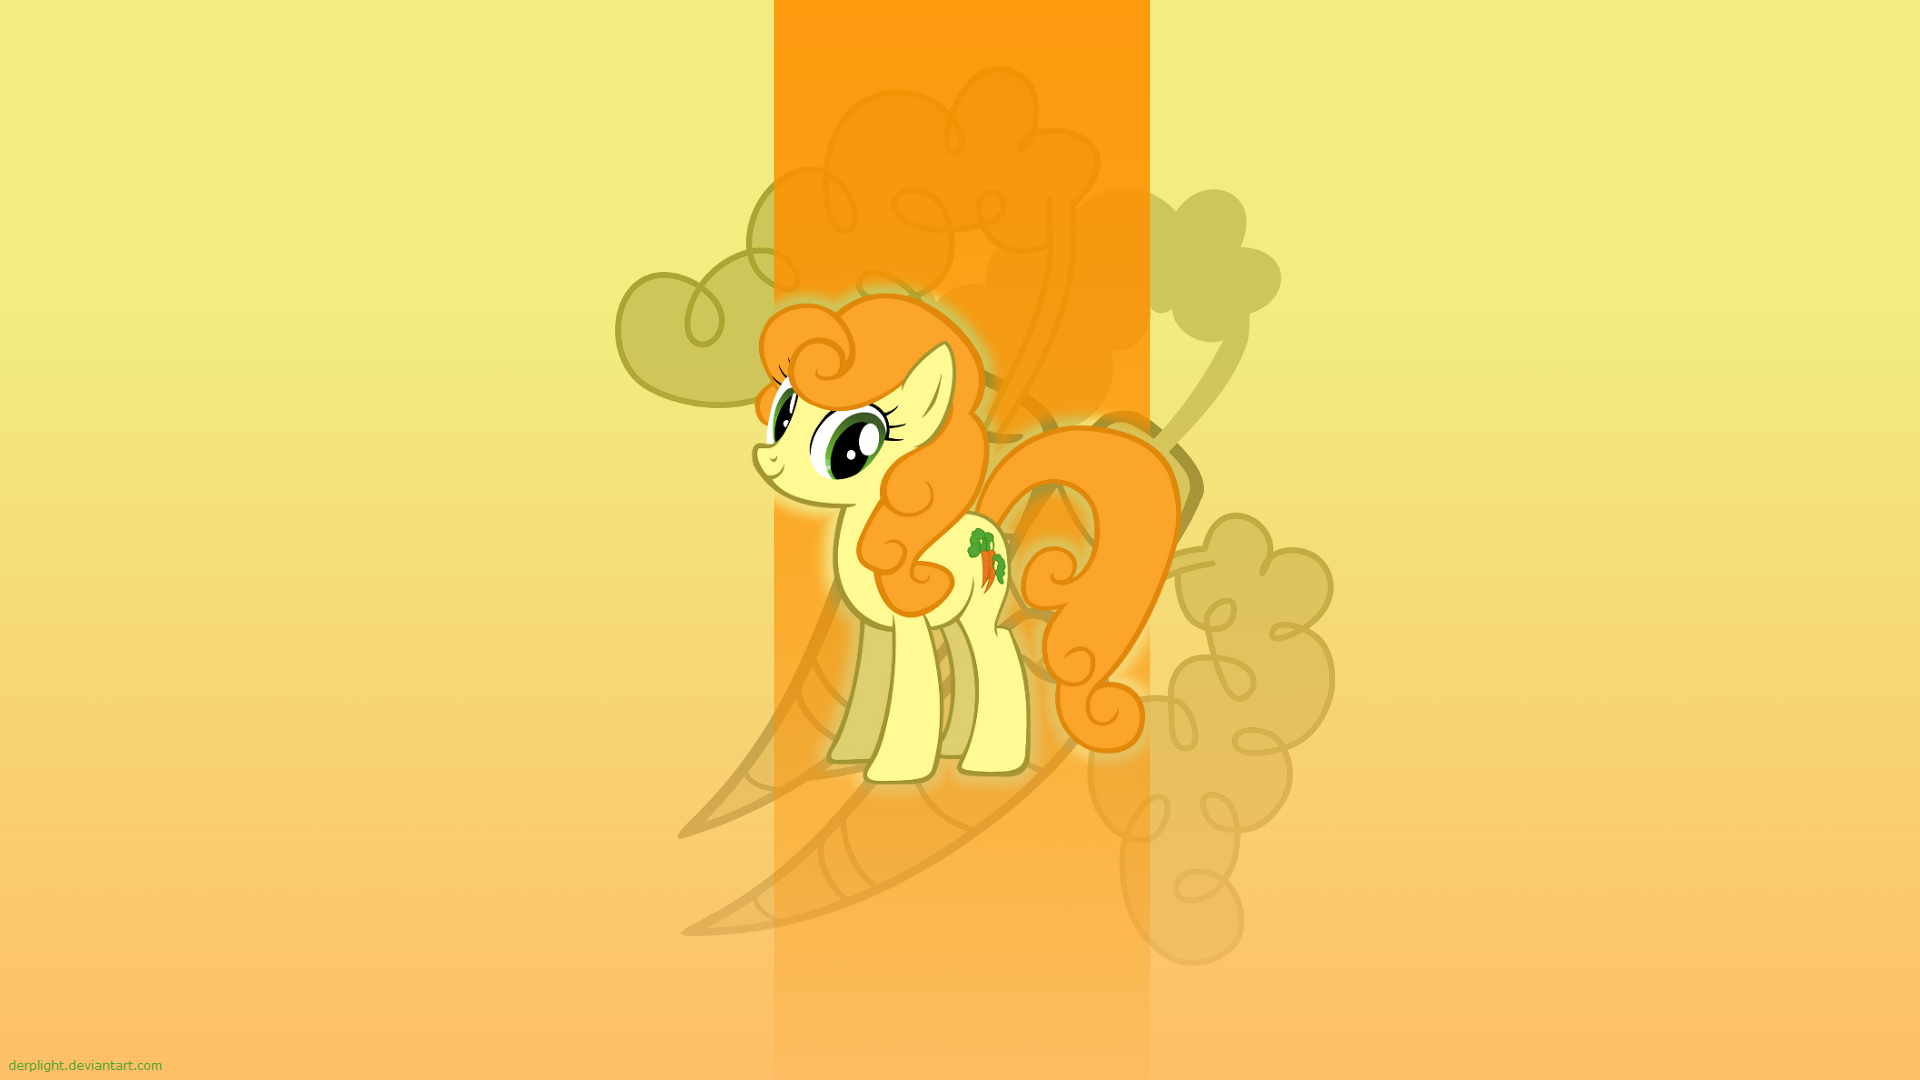 Carrot Top Wallpaper by DerpLight, SirLeandrea and The-Smiling-Pony